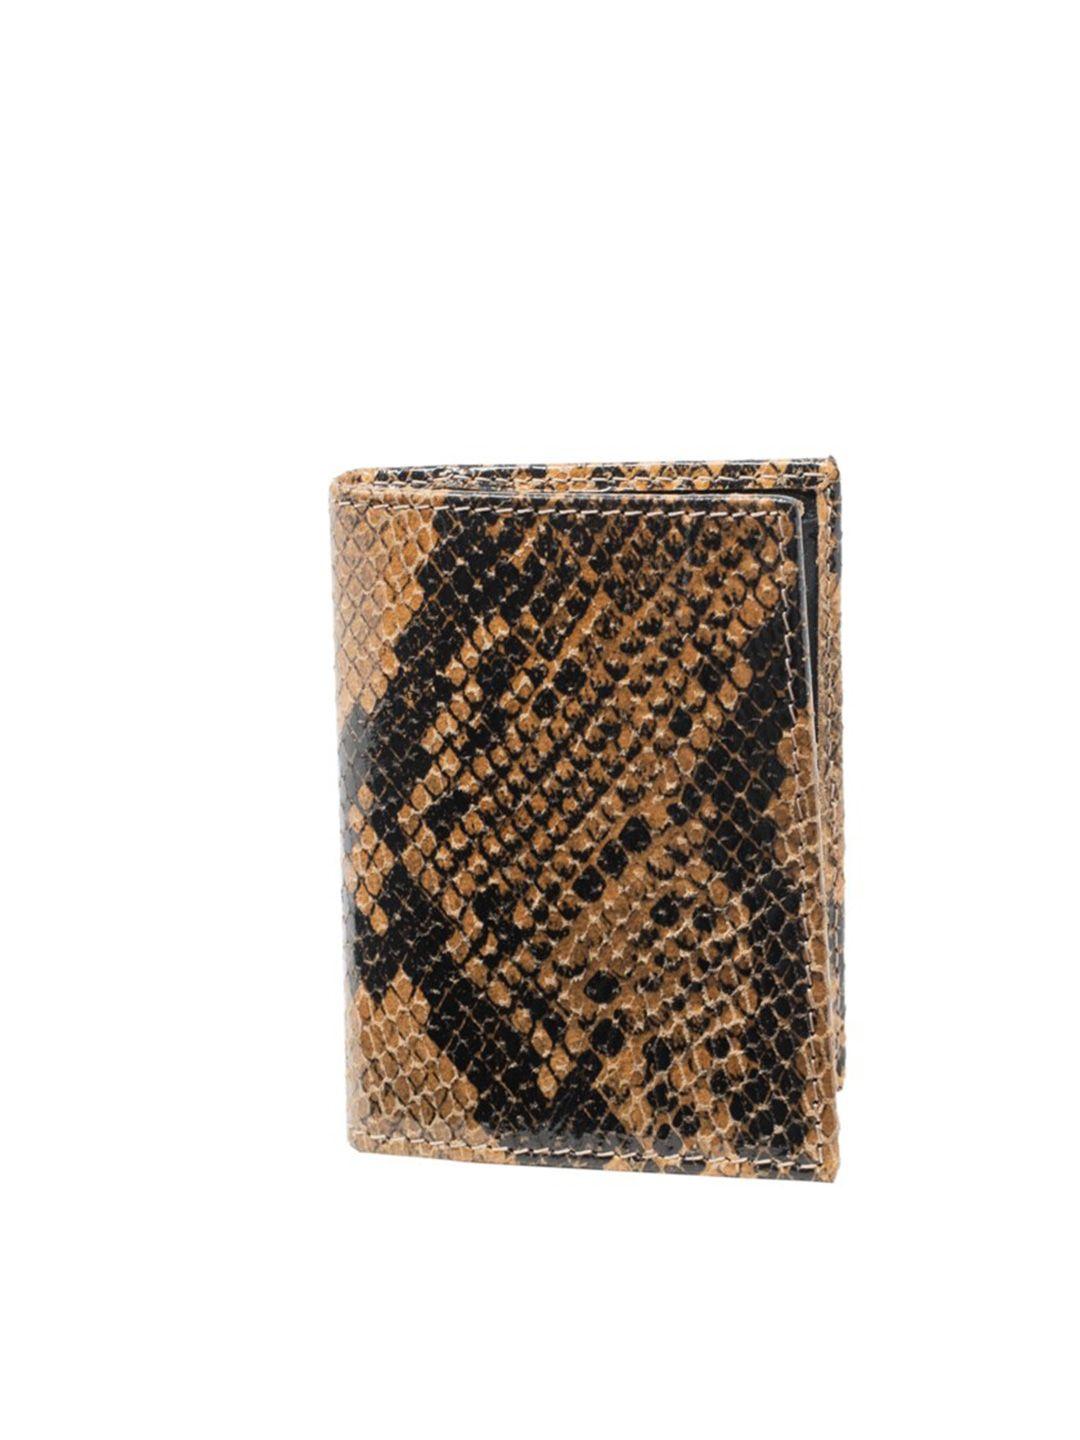 tohl men beige & black printed leather two fold wallet